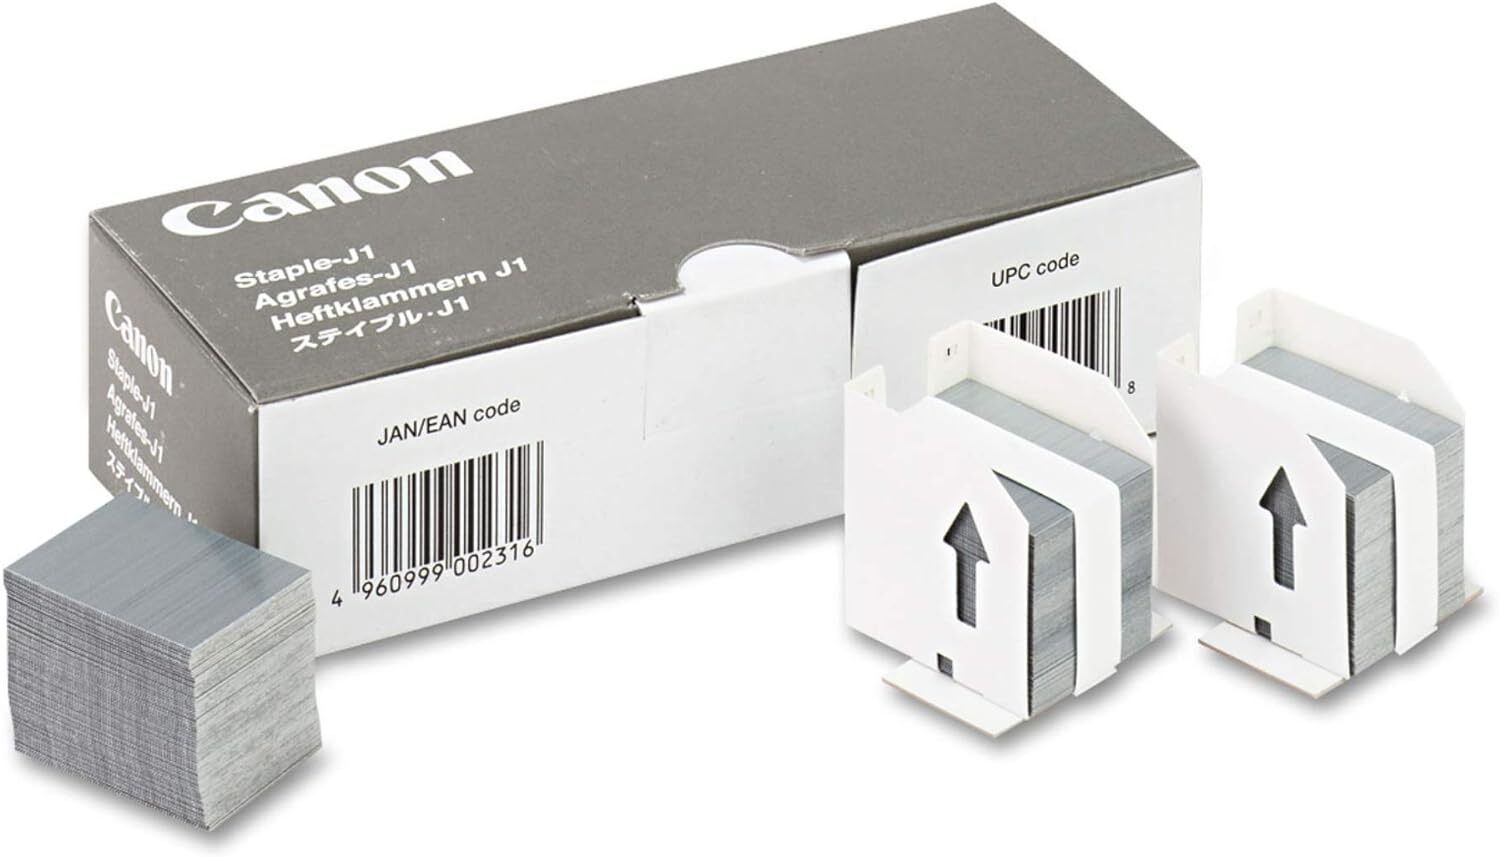 CNM6707A001AC - Canon Standard Staples for Canon IR2200/2800